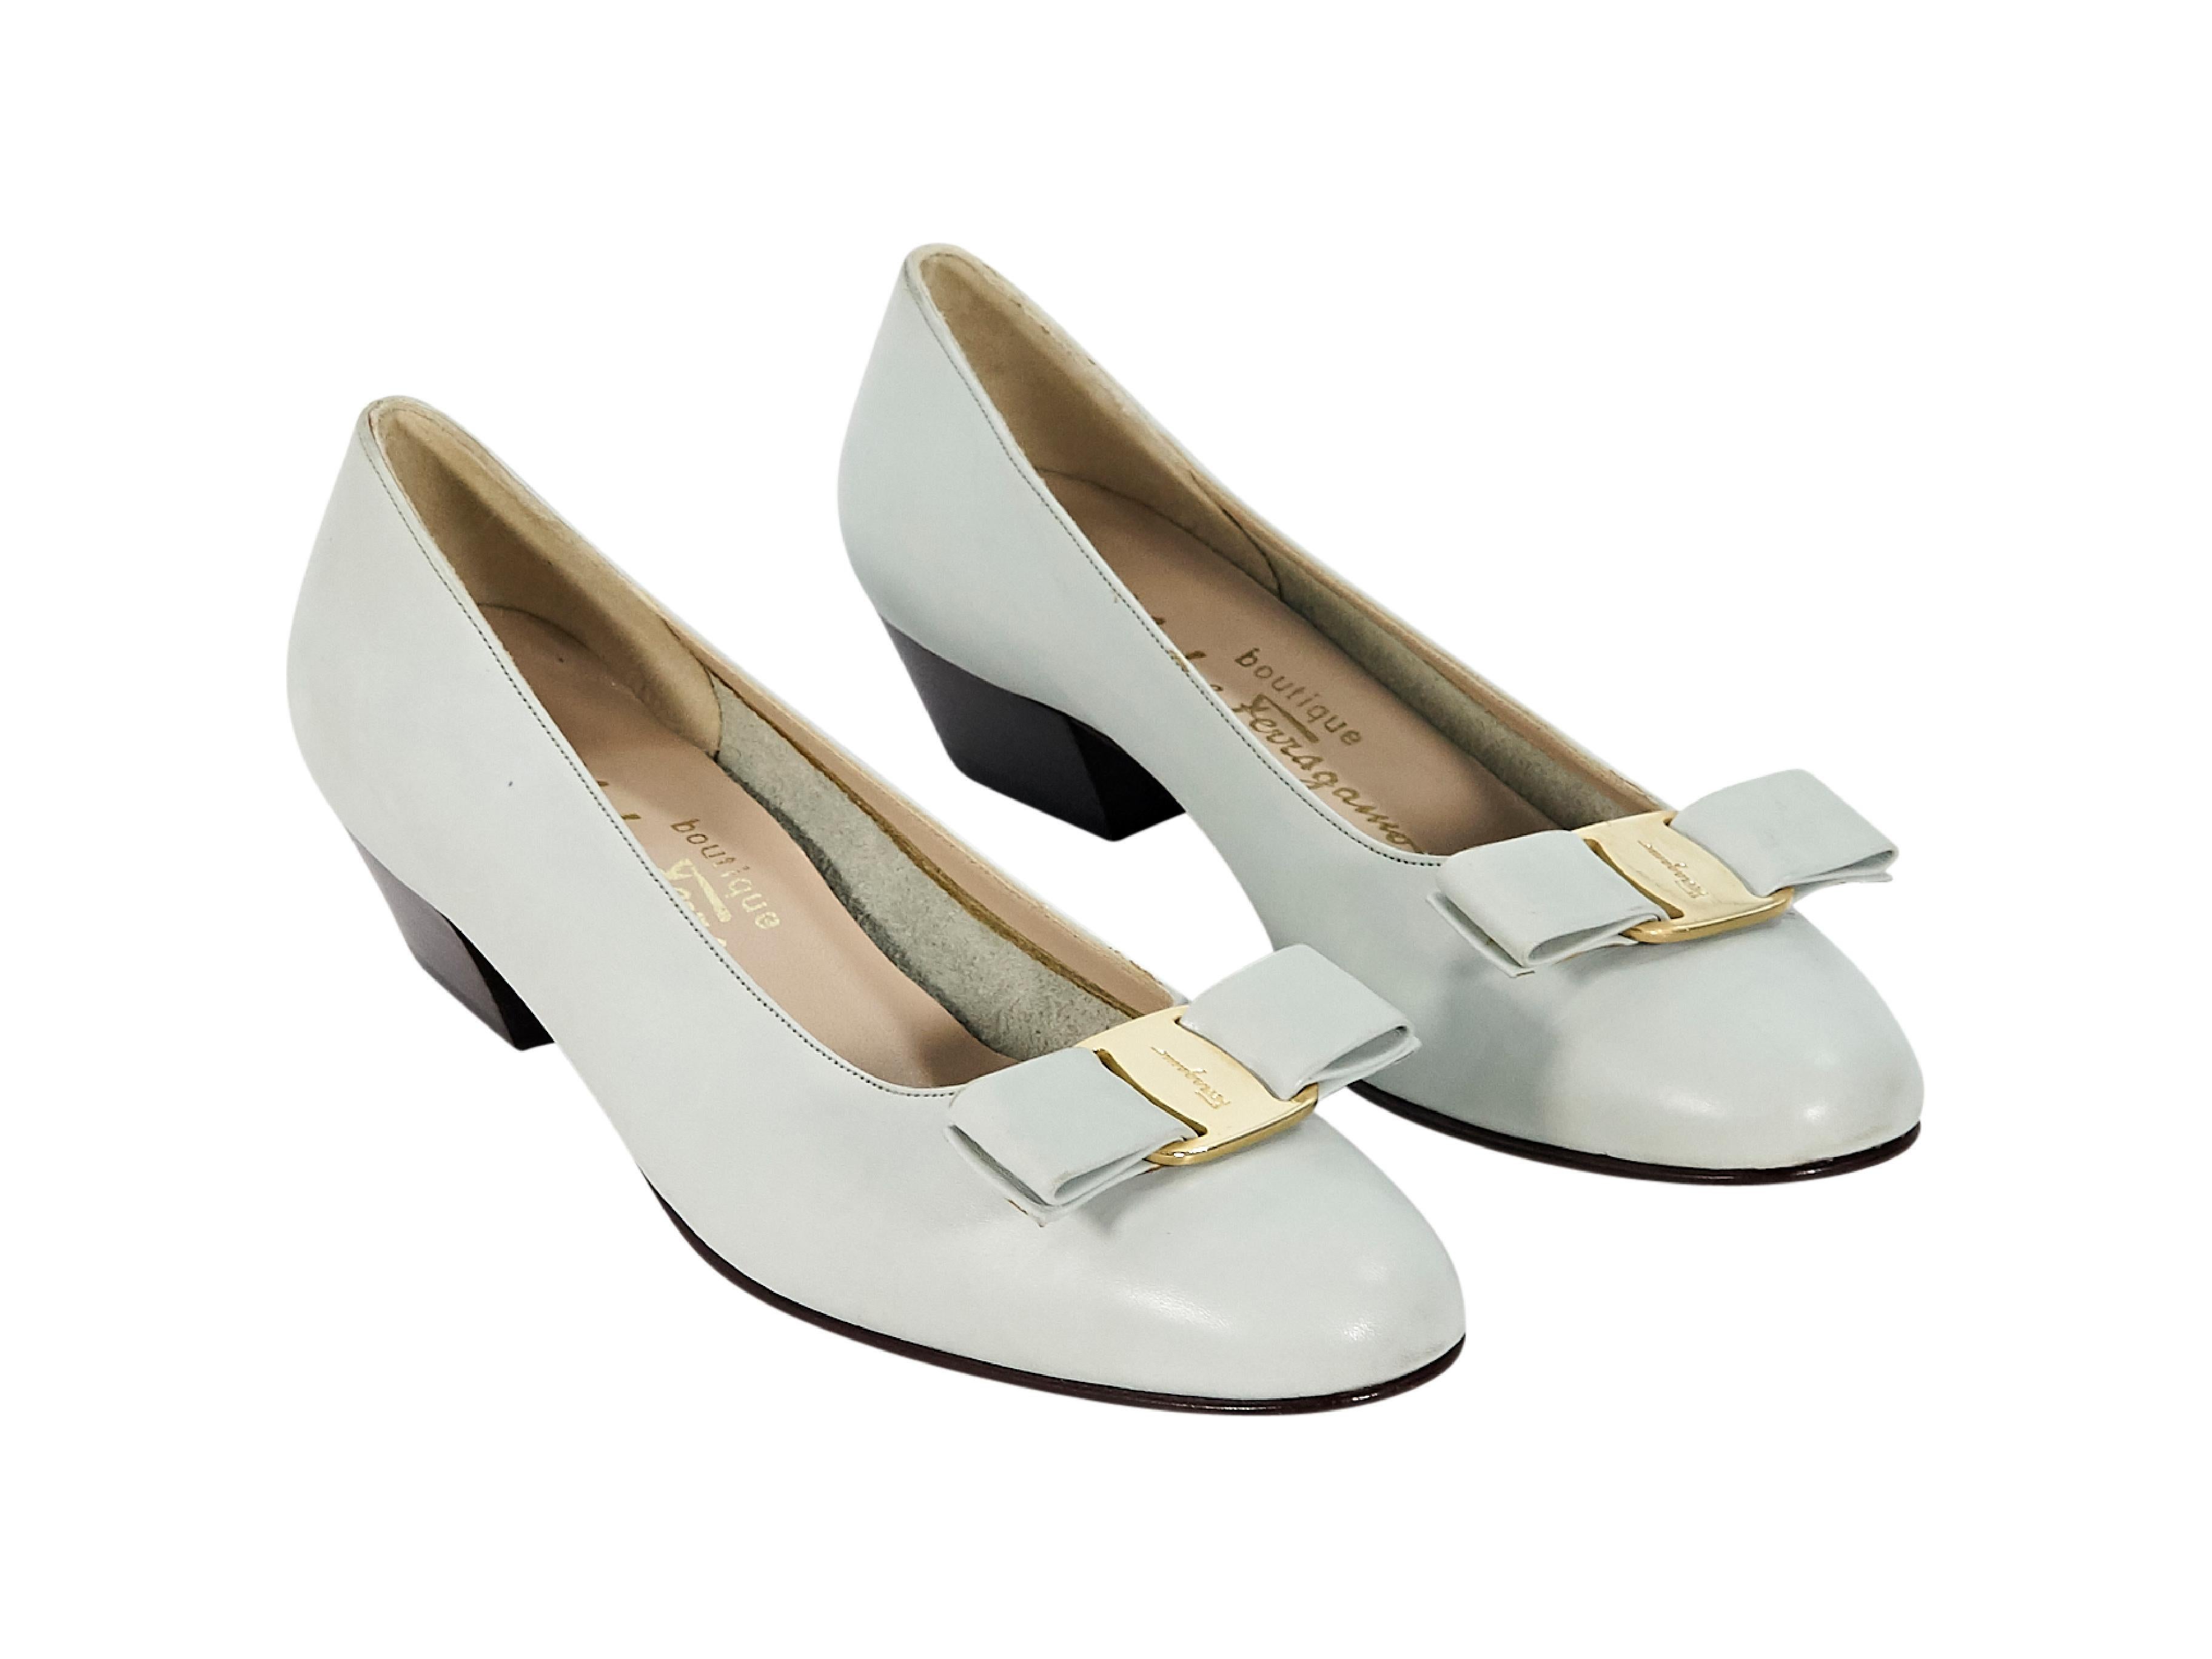 Product details:  Light grey leather ballet flats by Salvatore Ferragamo.  Bow detail at vamp.  Round toe.  Low stacked heel.  Slip-on style.  1.25